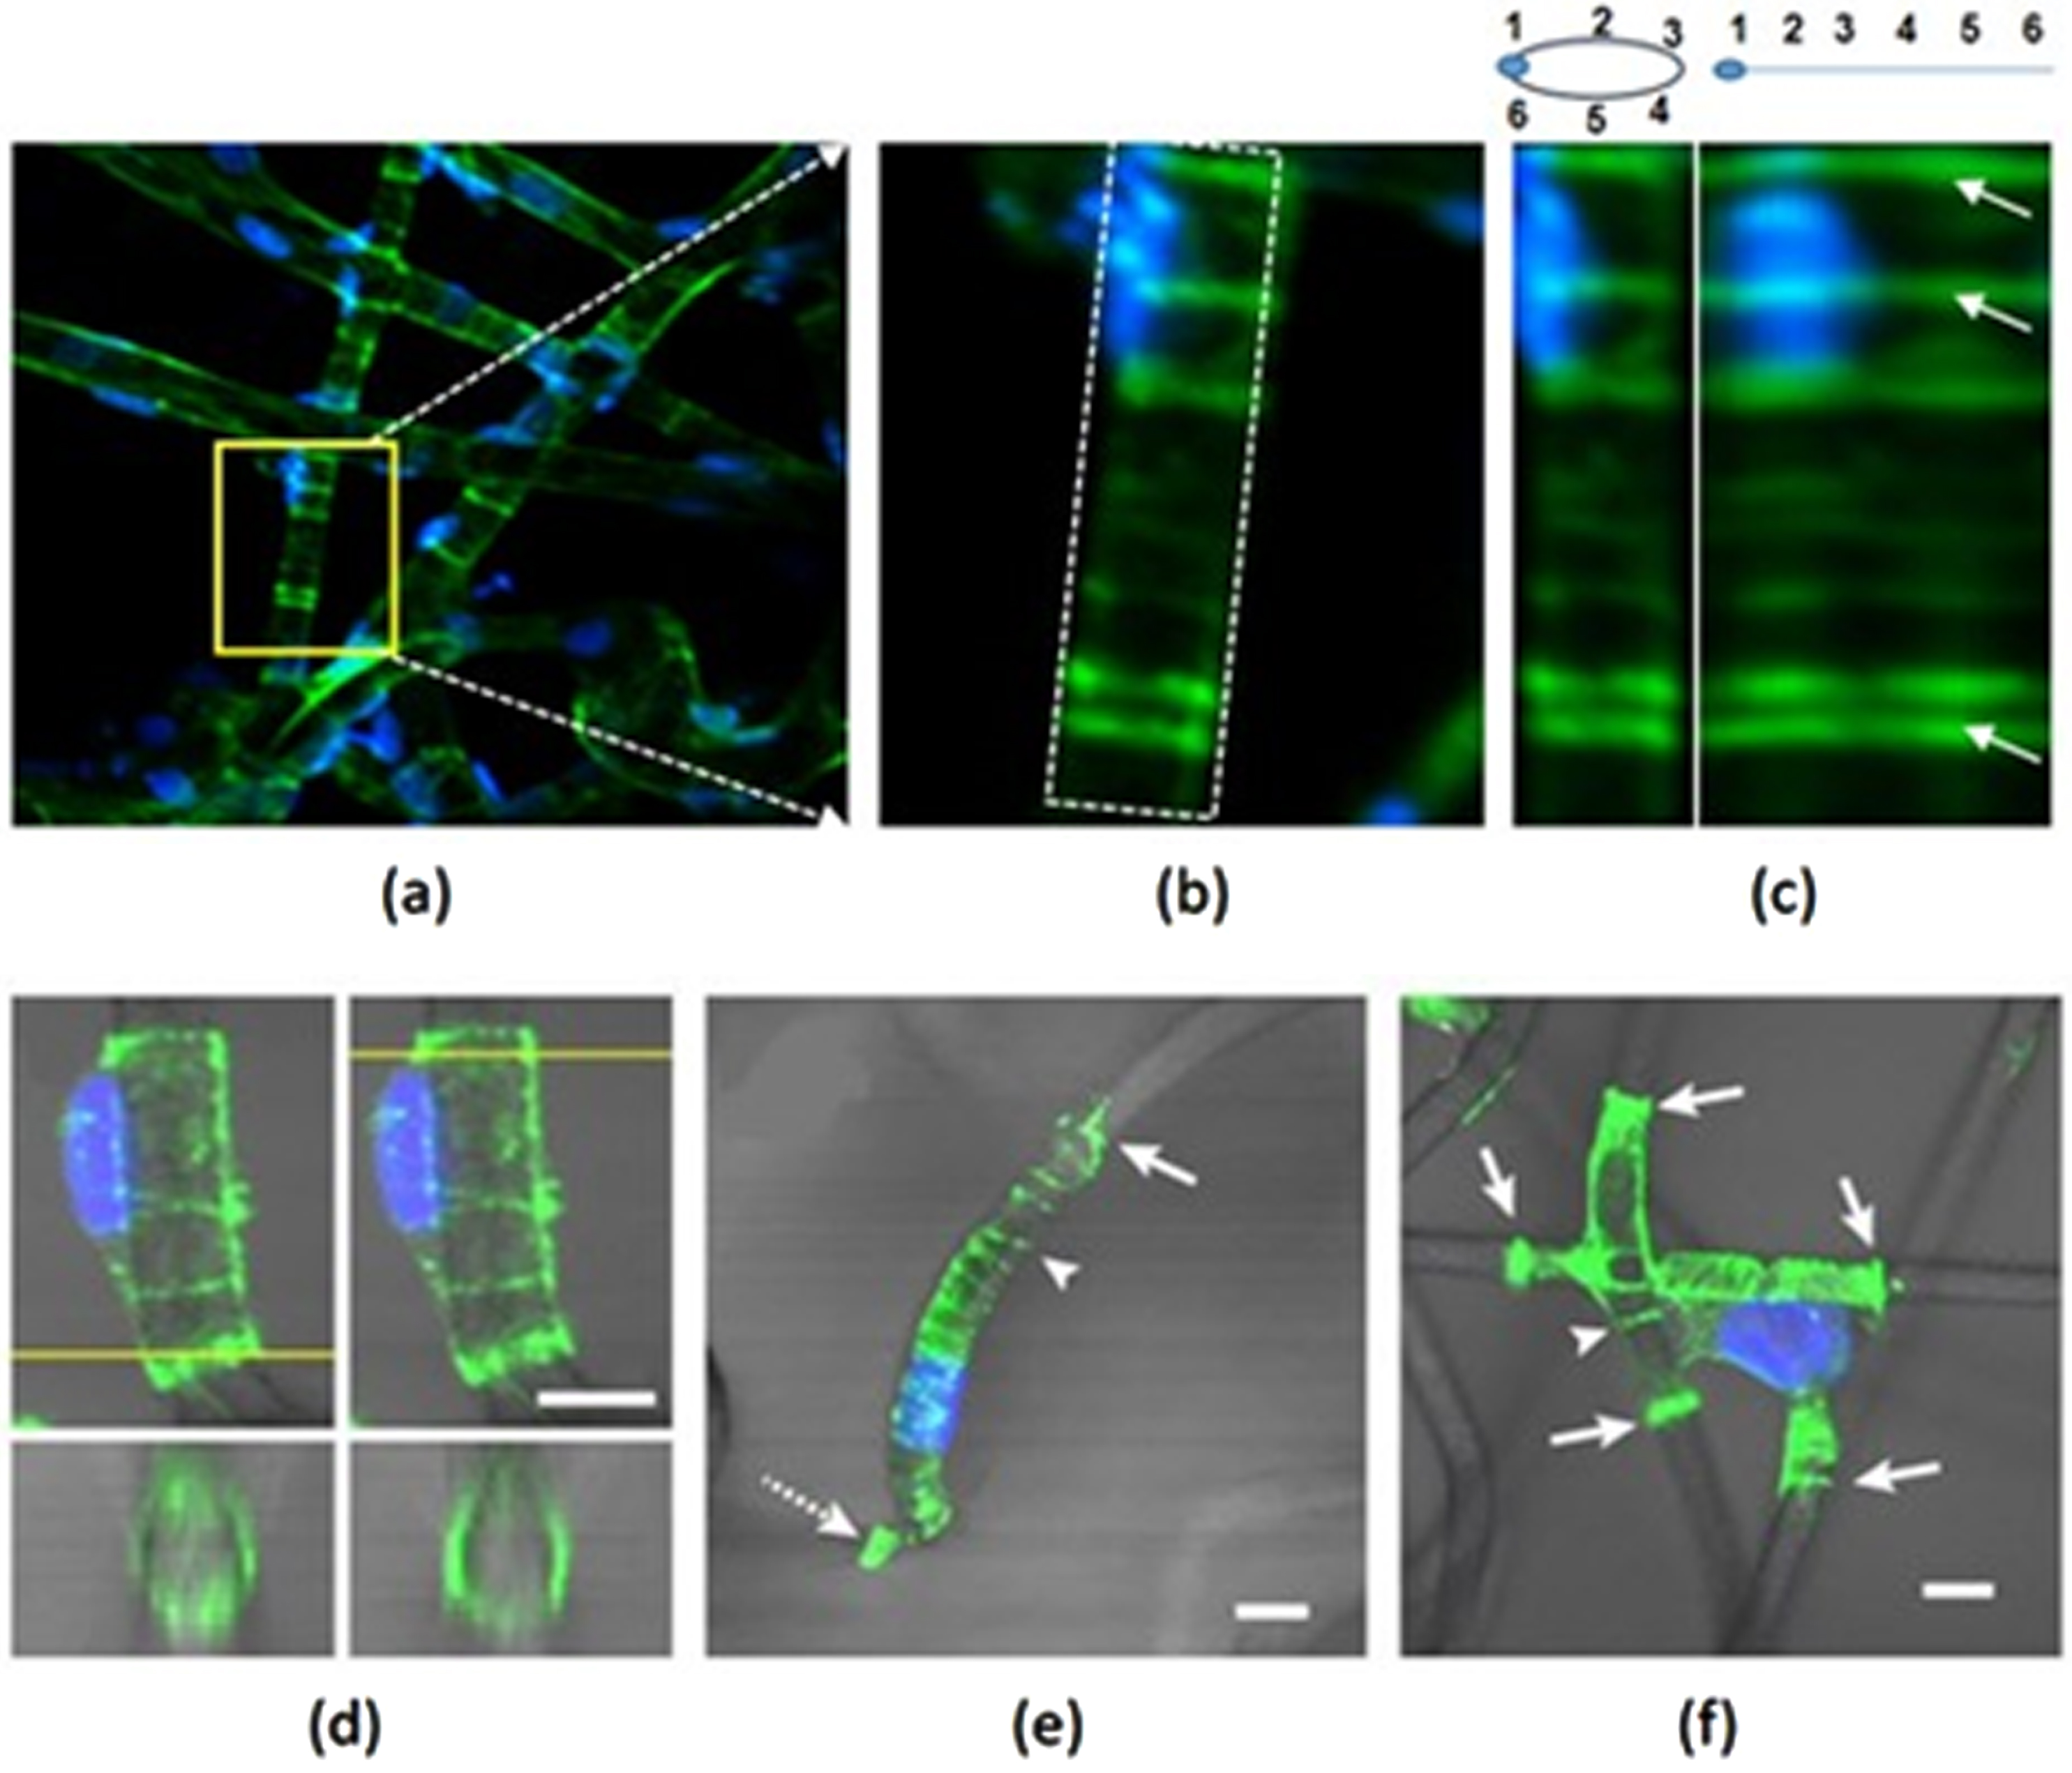 Visualization of circular gripping of SMFs by F-actin in the human umbilical vein ECs (HUVECs) (Reproduced from [1]). (a)-(c) visualized F-actin in the HUVECS. (a) An original confocal image in 2D projection. A SMF portion containing F-actin bands of interest is marked by a yellow rectangle; (b) An enlarged image of the yellow rectangle in (a); (c) Left shows a vertically oriented image projection of (b). For comparison, we unwrapped the cylinder distribution of F-action to visualize full-circle continuity of F-actin around the SMF (right). Fig (d)-(f) are examples of F-actin rings in the interaction between a cell and a scaffold(s). (d) Full-wrapping of a fiber at the cell’s extremities (yellow line) by F-action bundles. The white scale is around 10μm; (e) F-actin in a SMF-attached cell. It contains AGs (arrowhead), an actin ruffle-like structure (arrow), and a blob with abundant actin (dashed arrow); (f) A cell is laid over three intertwining SMFs. The concentration of AGs is greater at all extremities than at the interior of the cell(arrowhead).